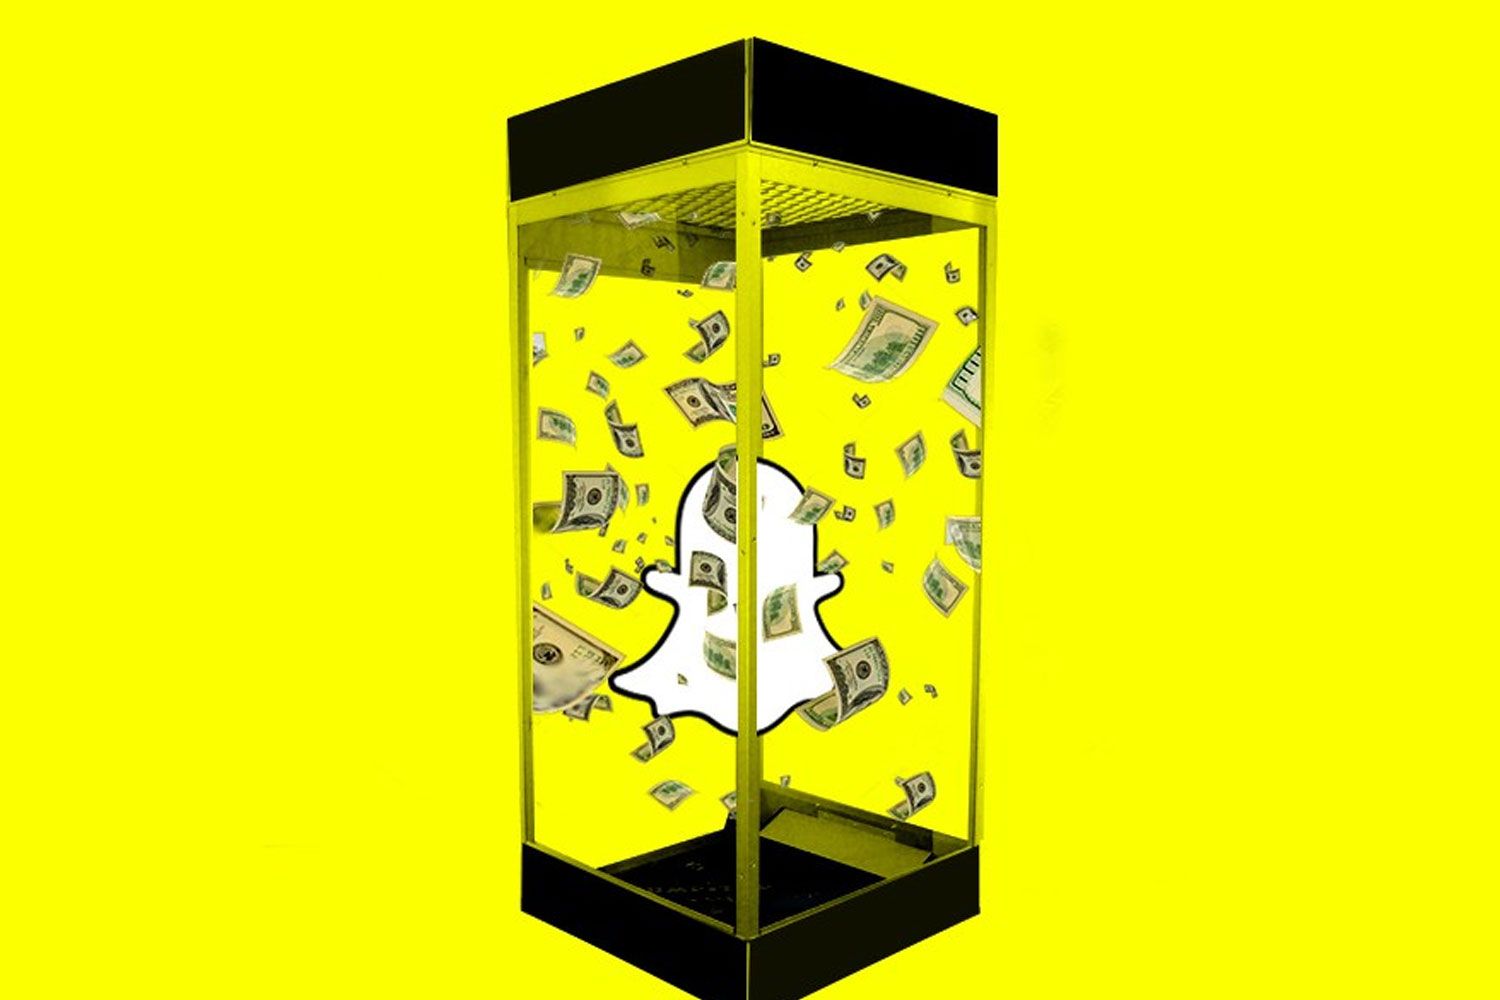 Resolution’s Darrell Jursa Comments on Snap’s Expansion of Commerce for Brands within Snapchat Stories